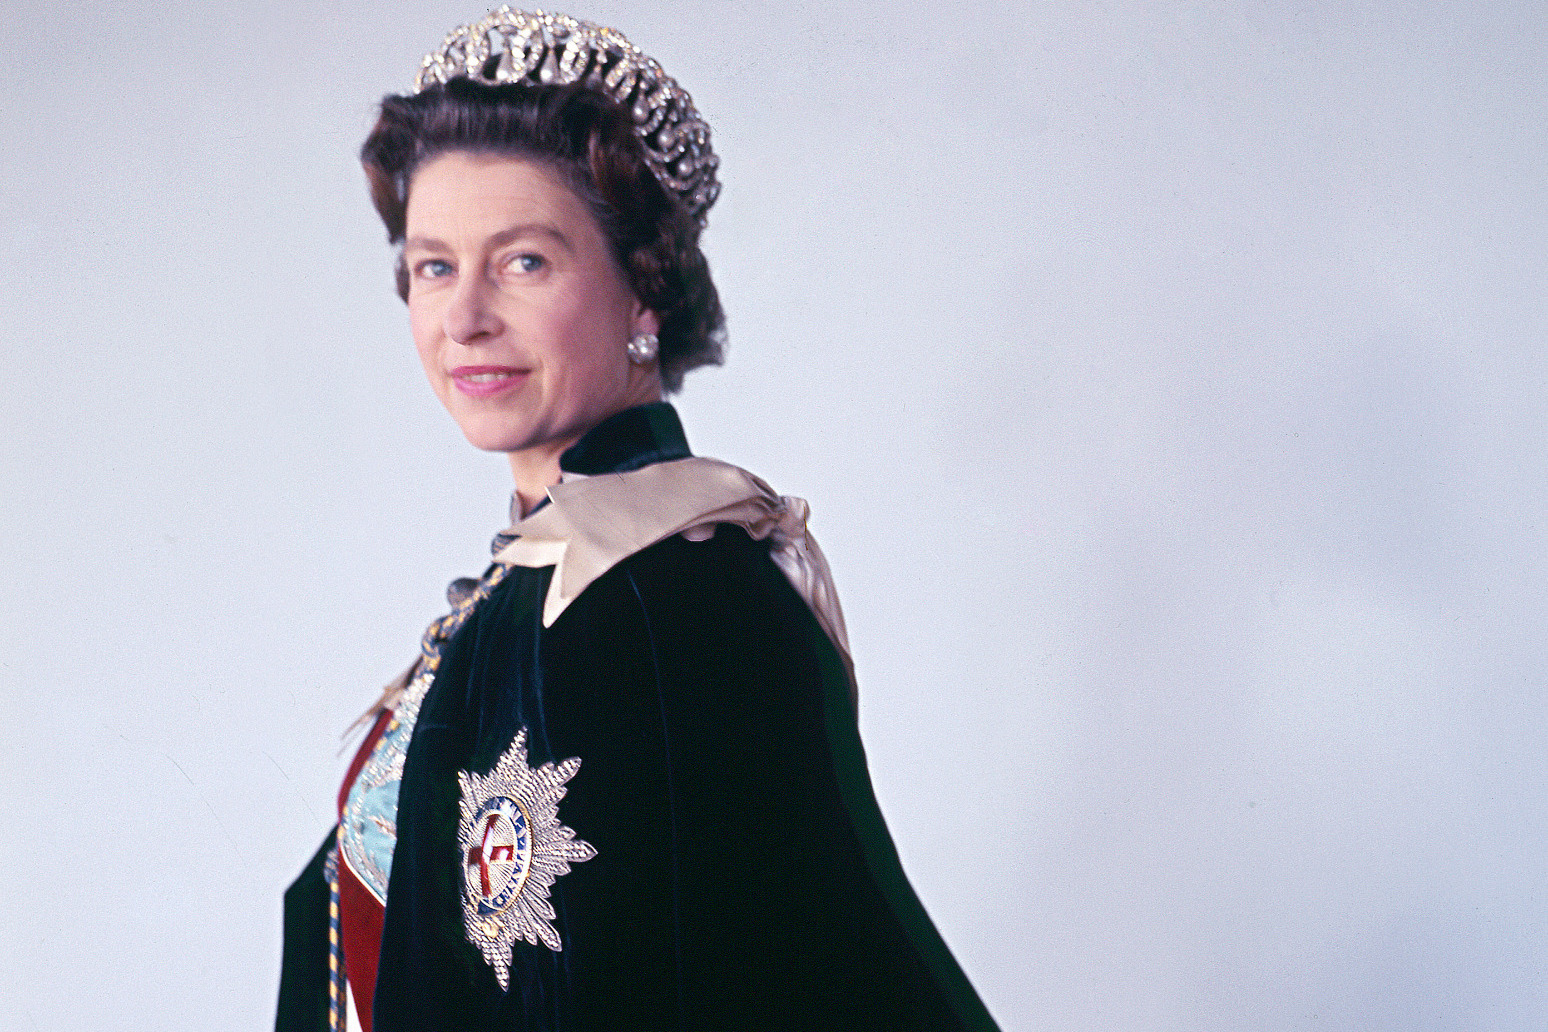 King reflects on loss of Elizabeth II in first anniversary of accession message 